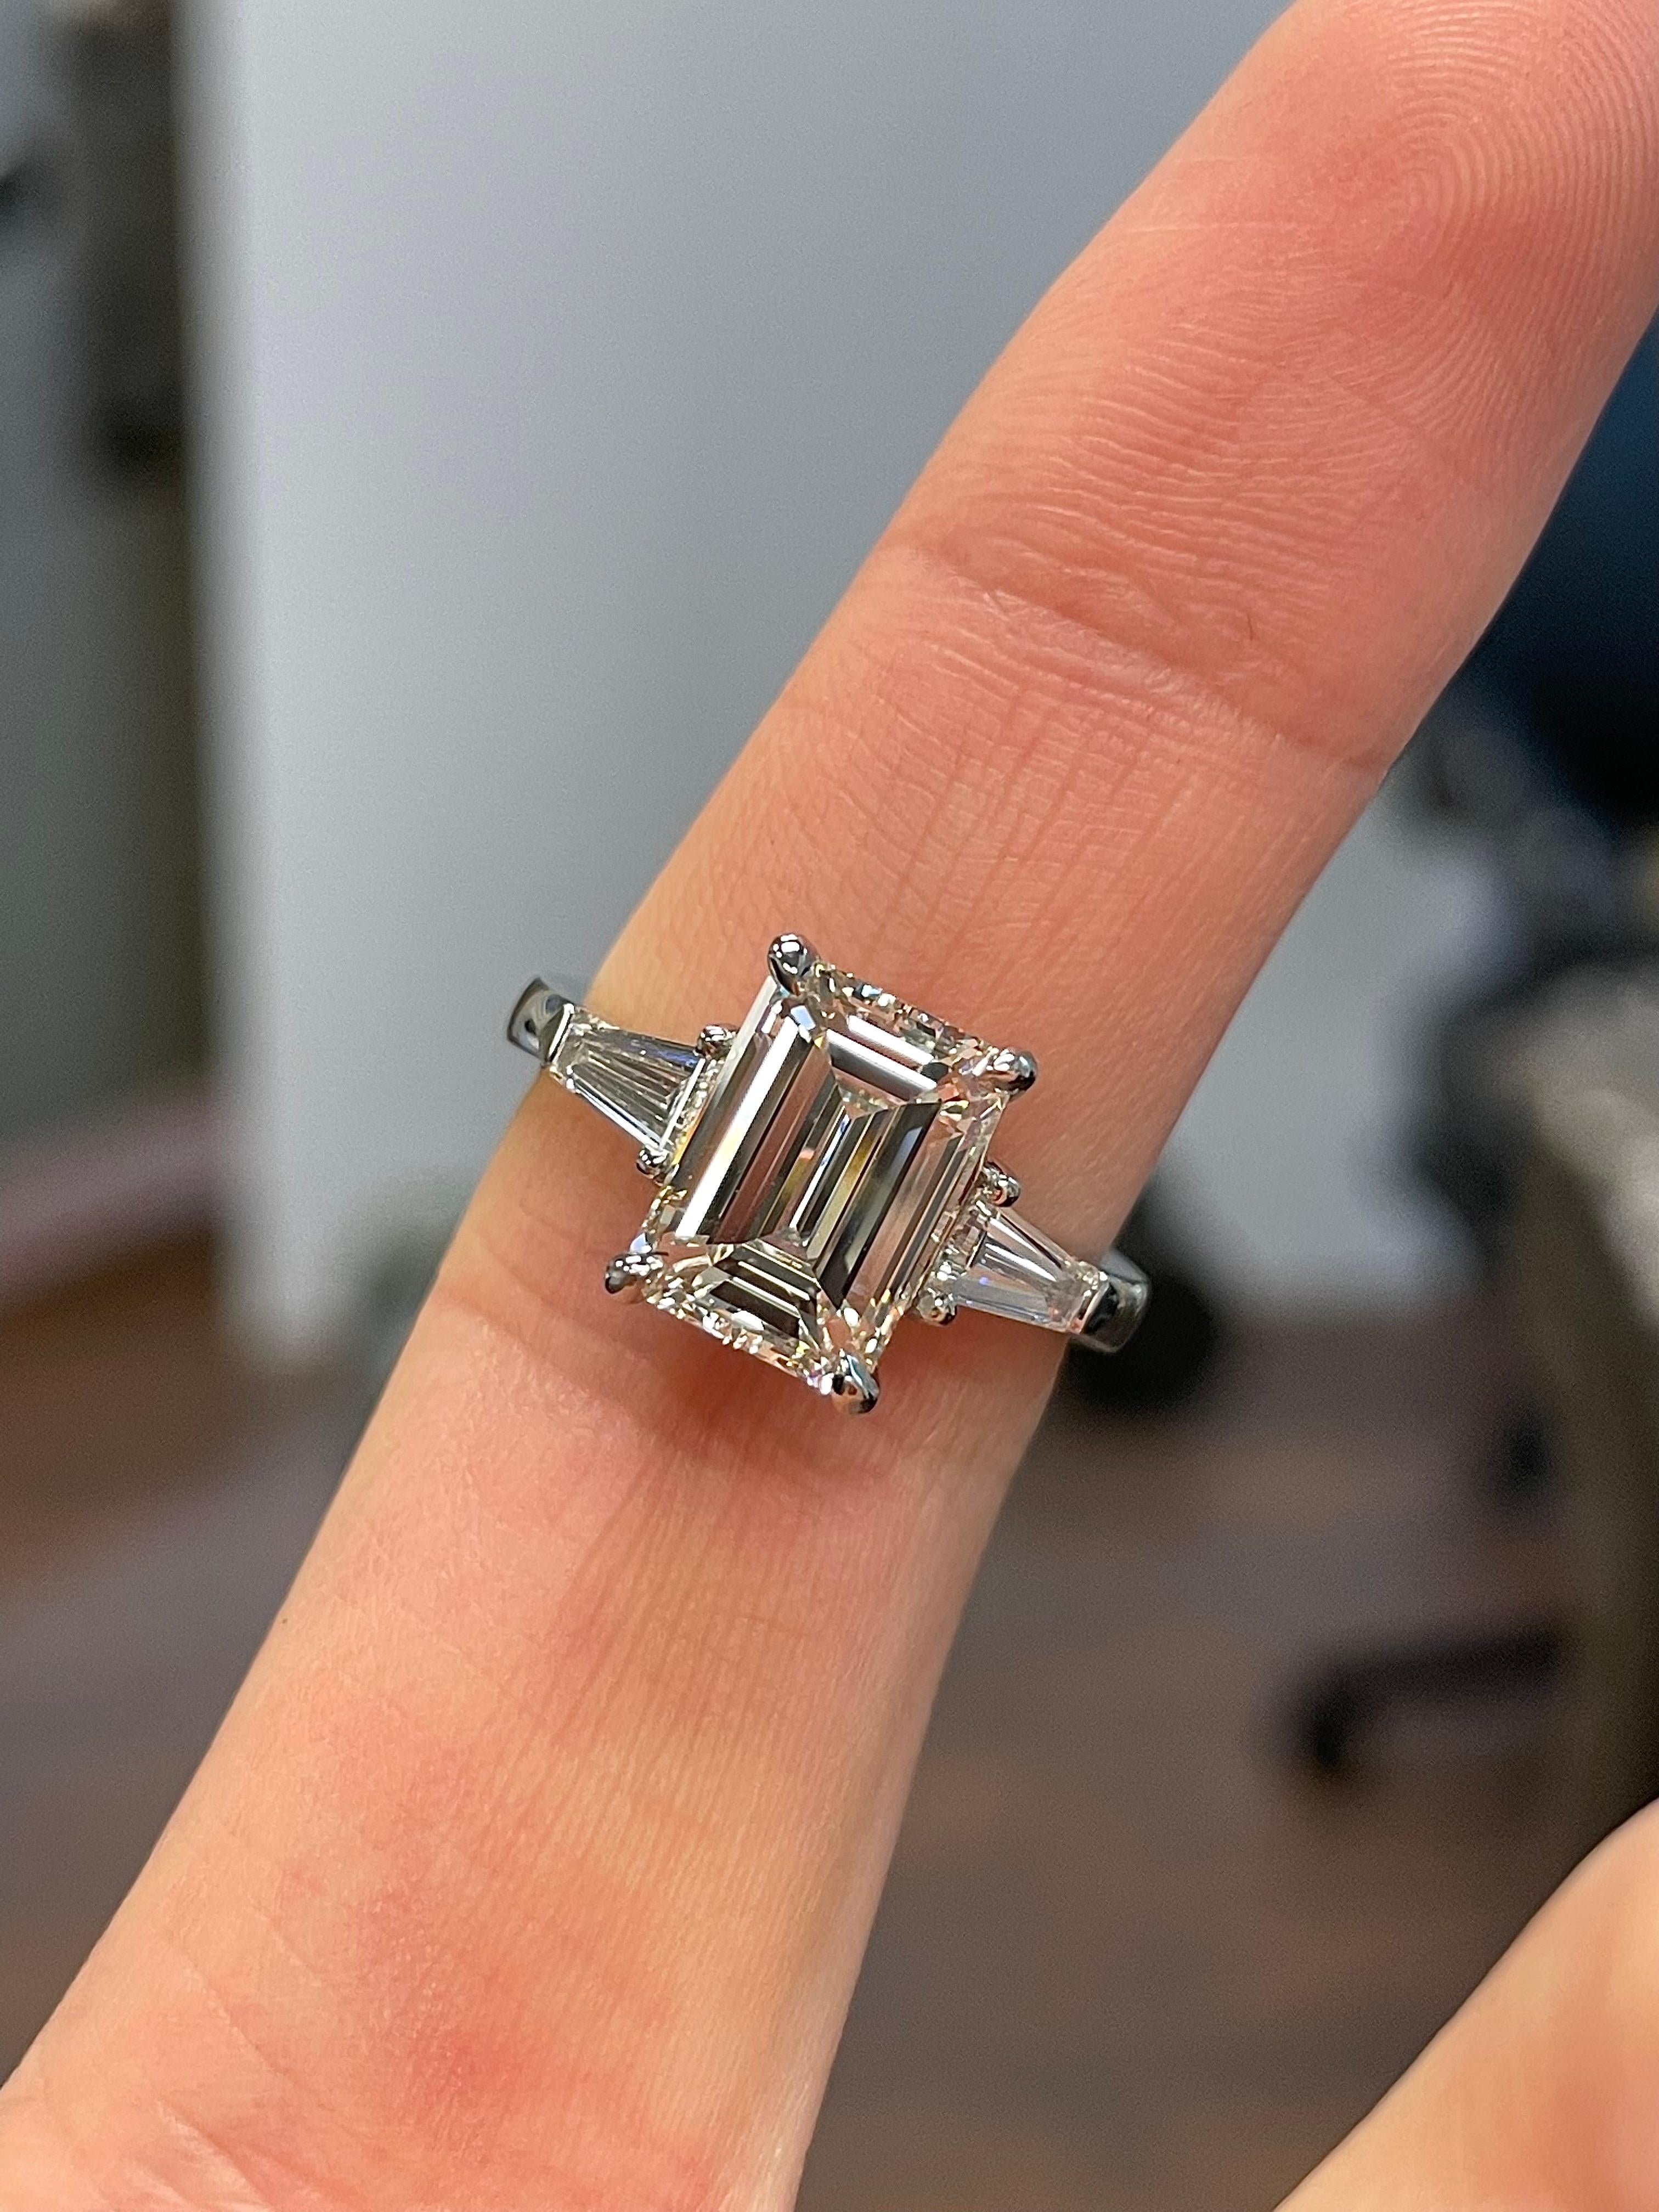 Setting:
Platinum

Center Stone: GIA Certified Emerald Cut Three-Stone Ring   
Carat Weight: 3.00
Clarity: VS1
Color: H
GIA # 2457061401

Side Stones: 
Tapered Baguette 

•Free Worldwide Shipping
•All Natural Diamonds/Gemstones

At EJ Diamonds, we